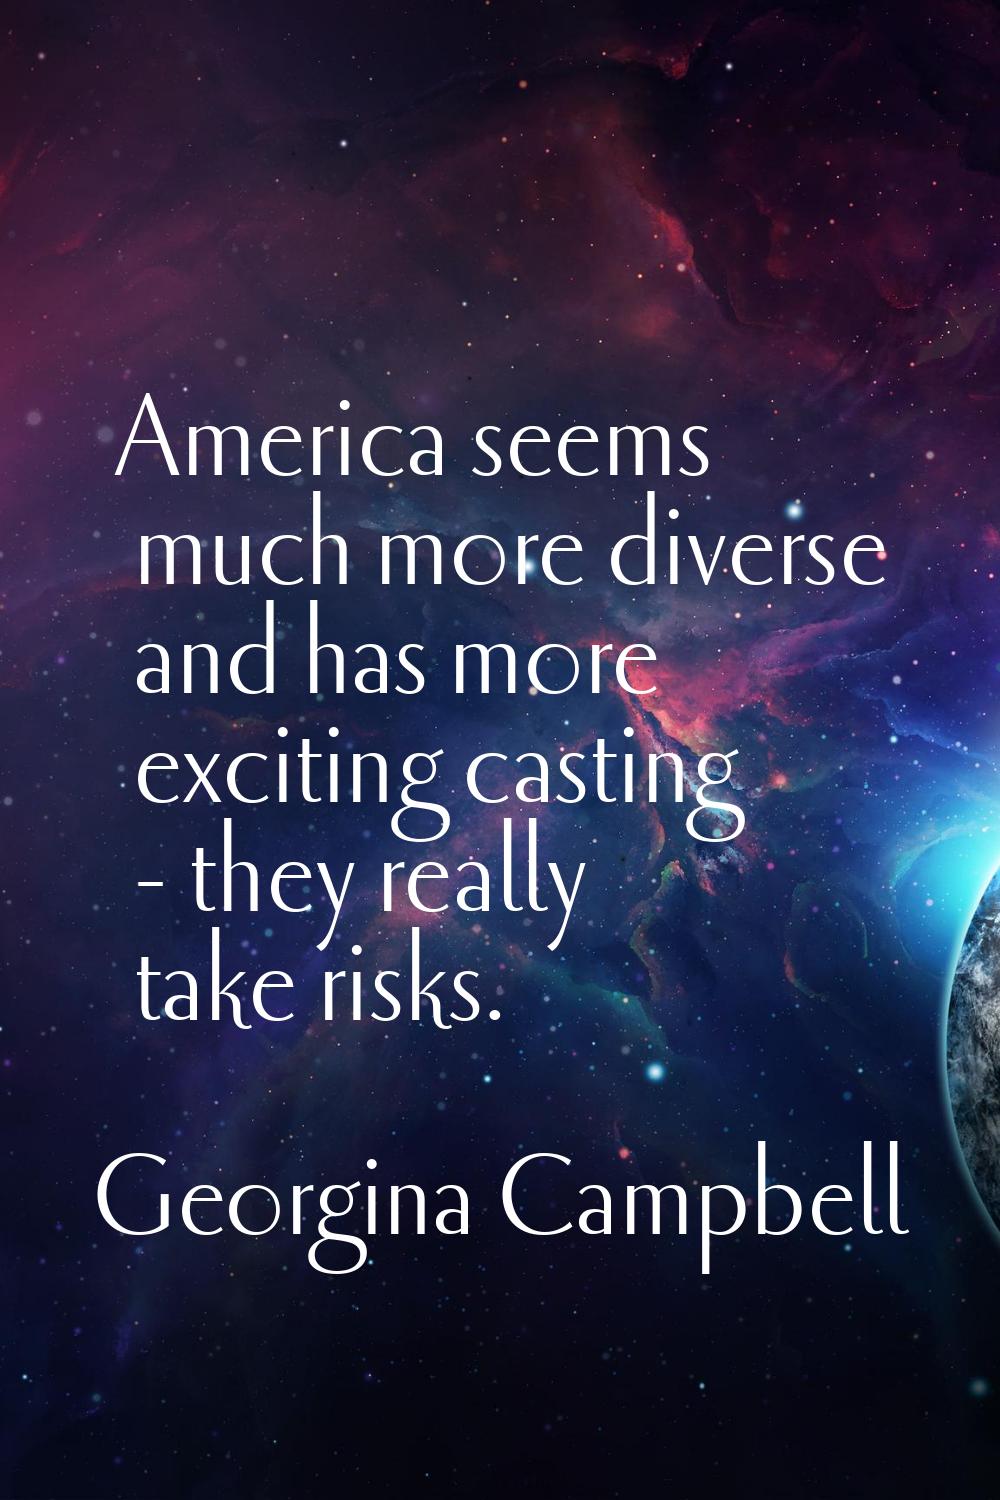 America seems much more diverse and has more exciting casting - they really take risks.